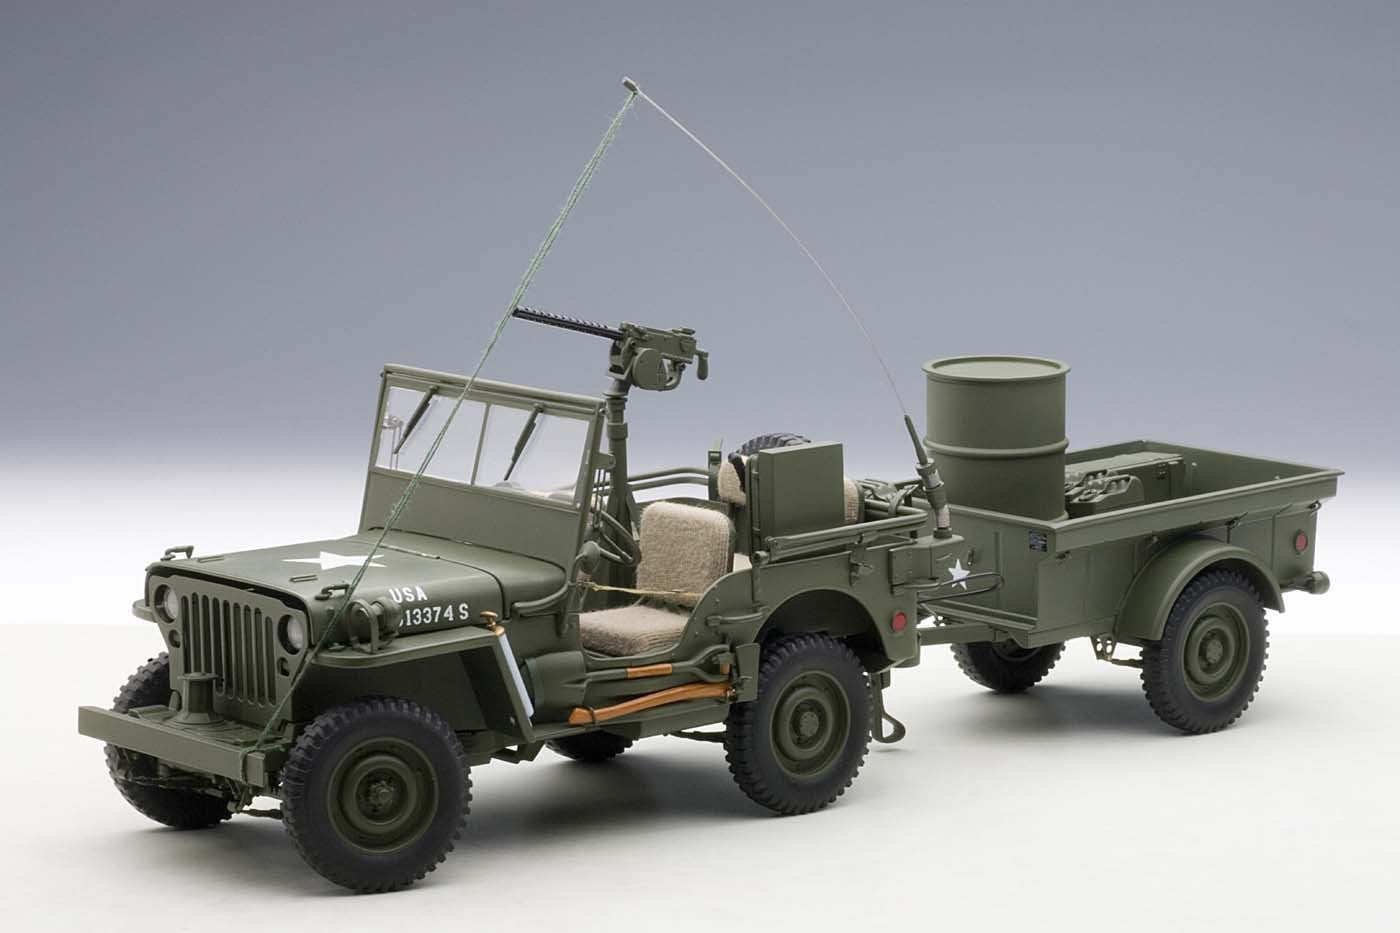 Greenlight Collectibles US Army Willys Jeep MB Green w/Star on Hood 1:43